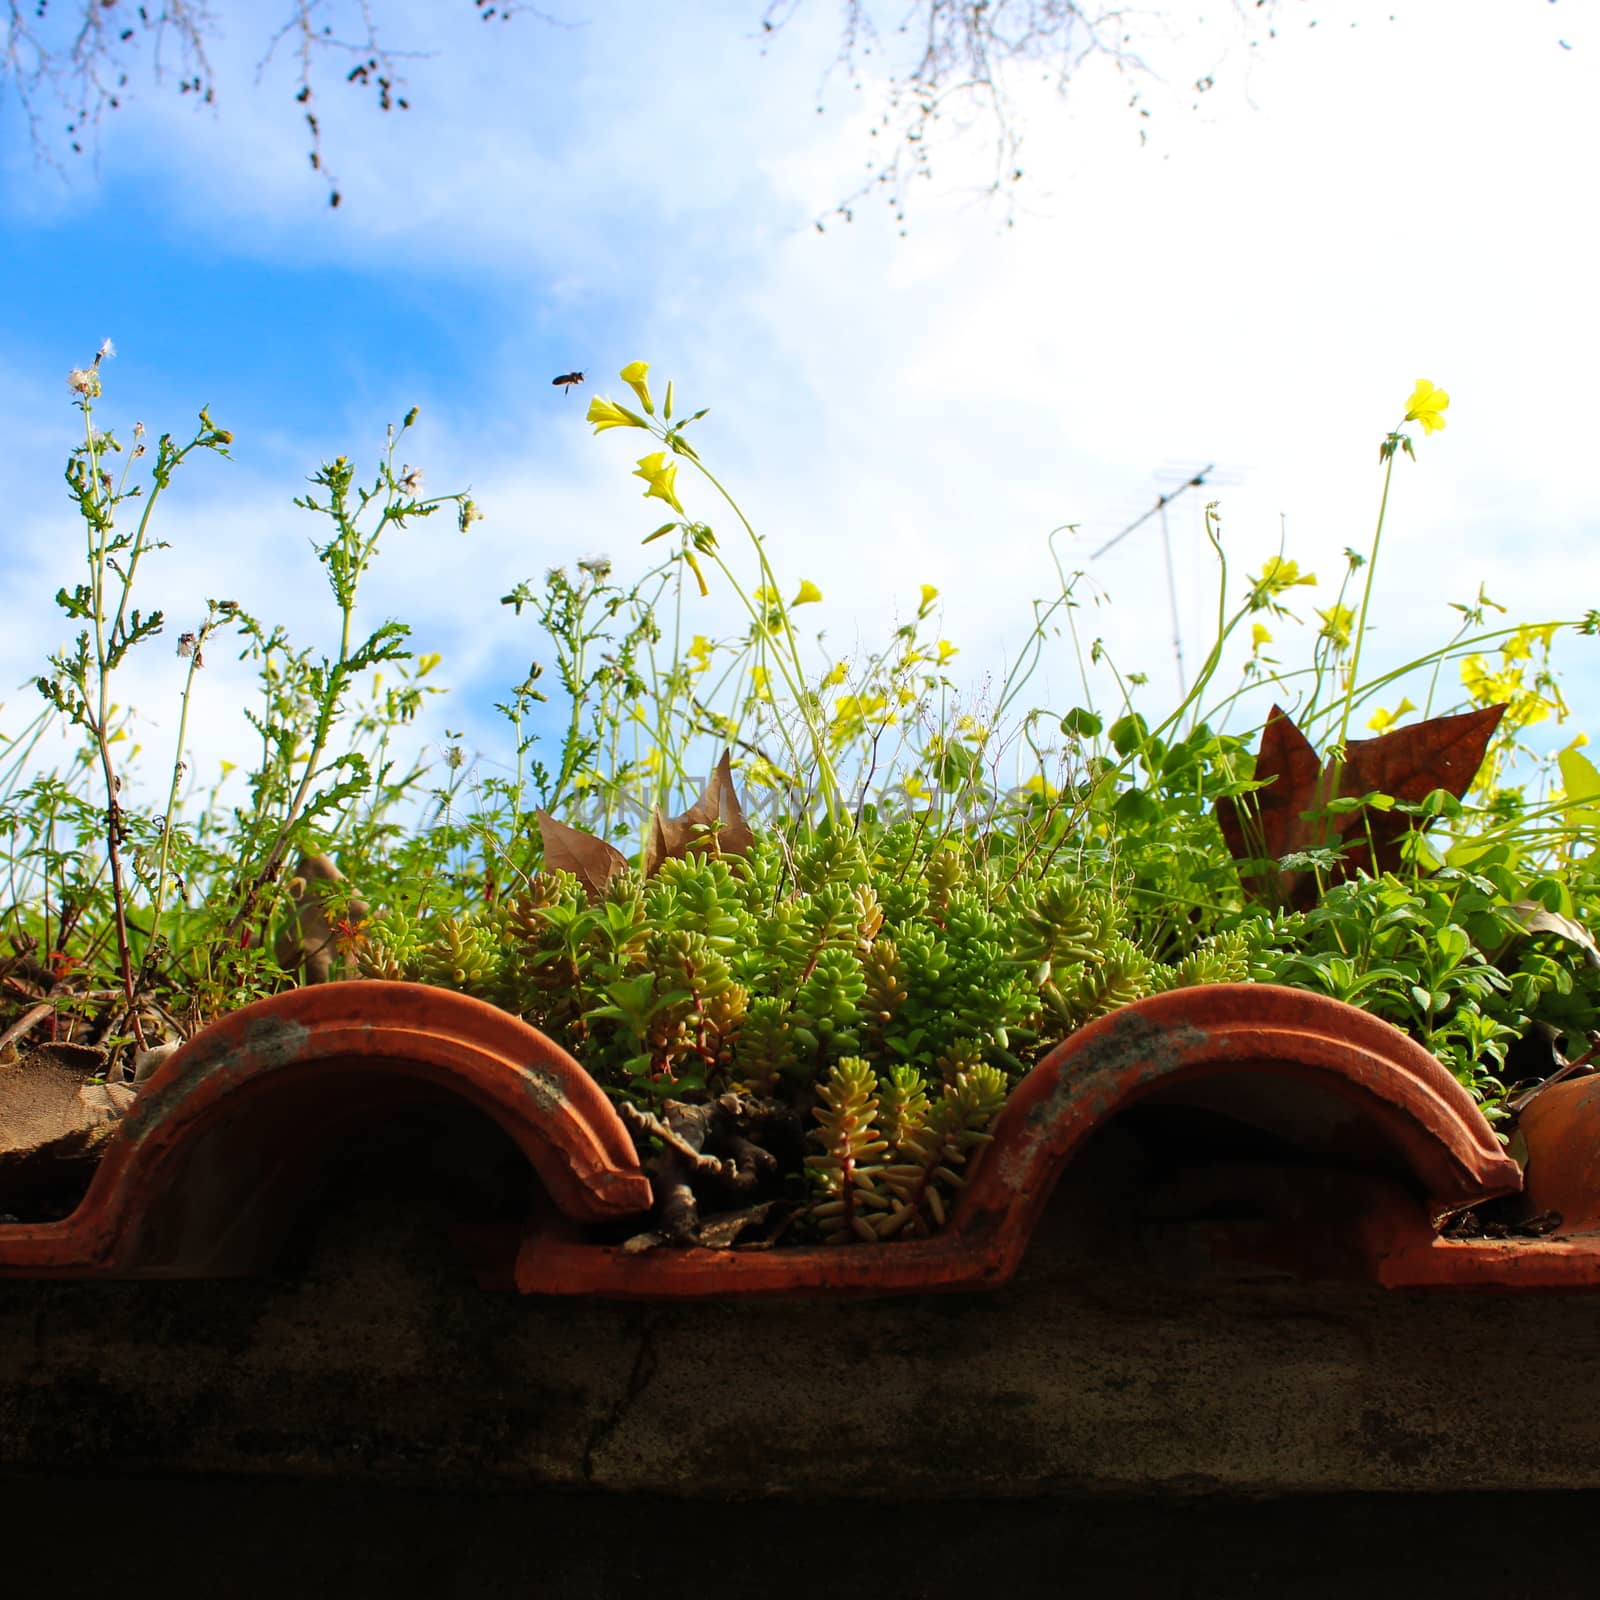 Square image of the roof of an old building inhabited by plants and insects. Beautiful scene on the roof after winter in spring. by mahirrov